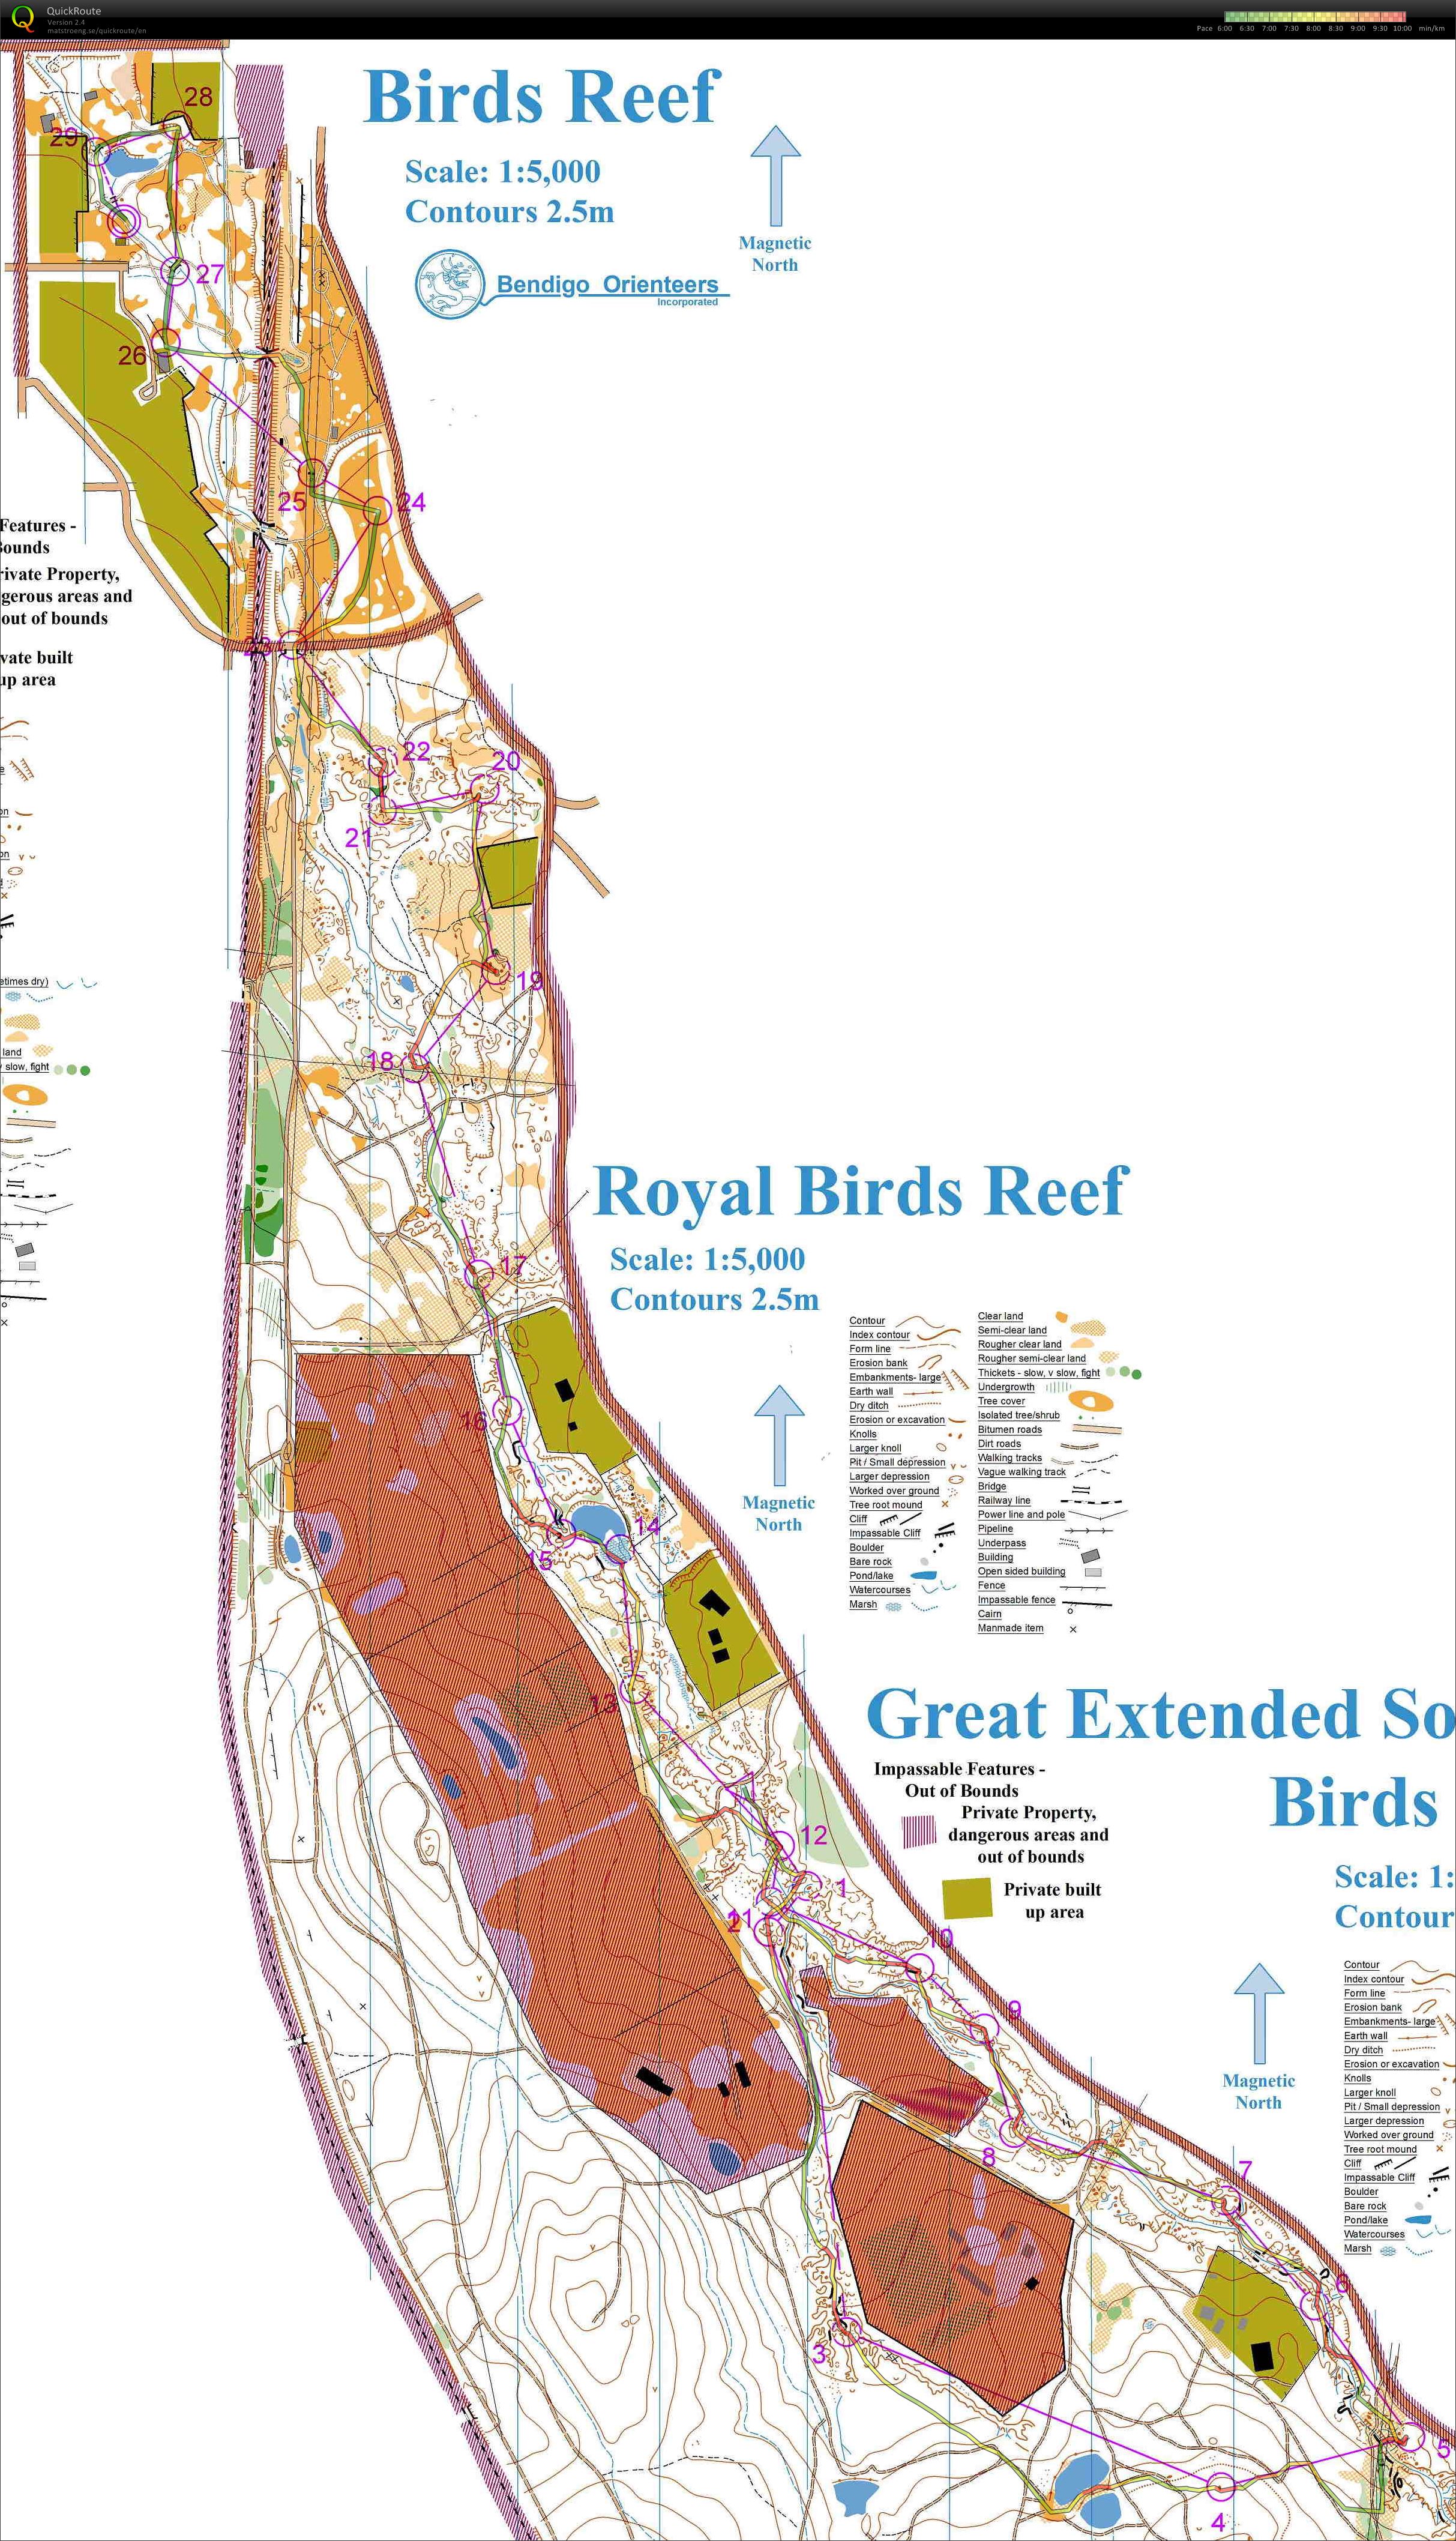 Re-run of State Series Course 3 Birds Reef (24.09.2015)